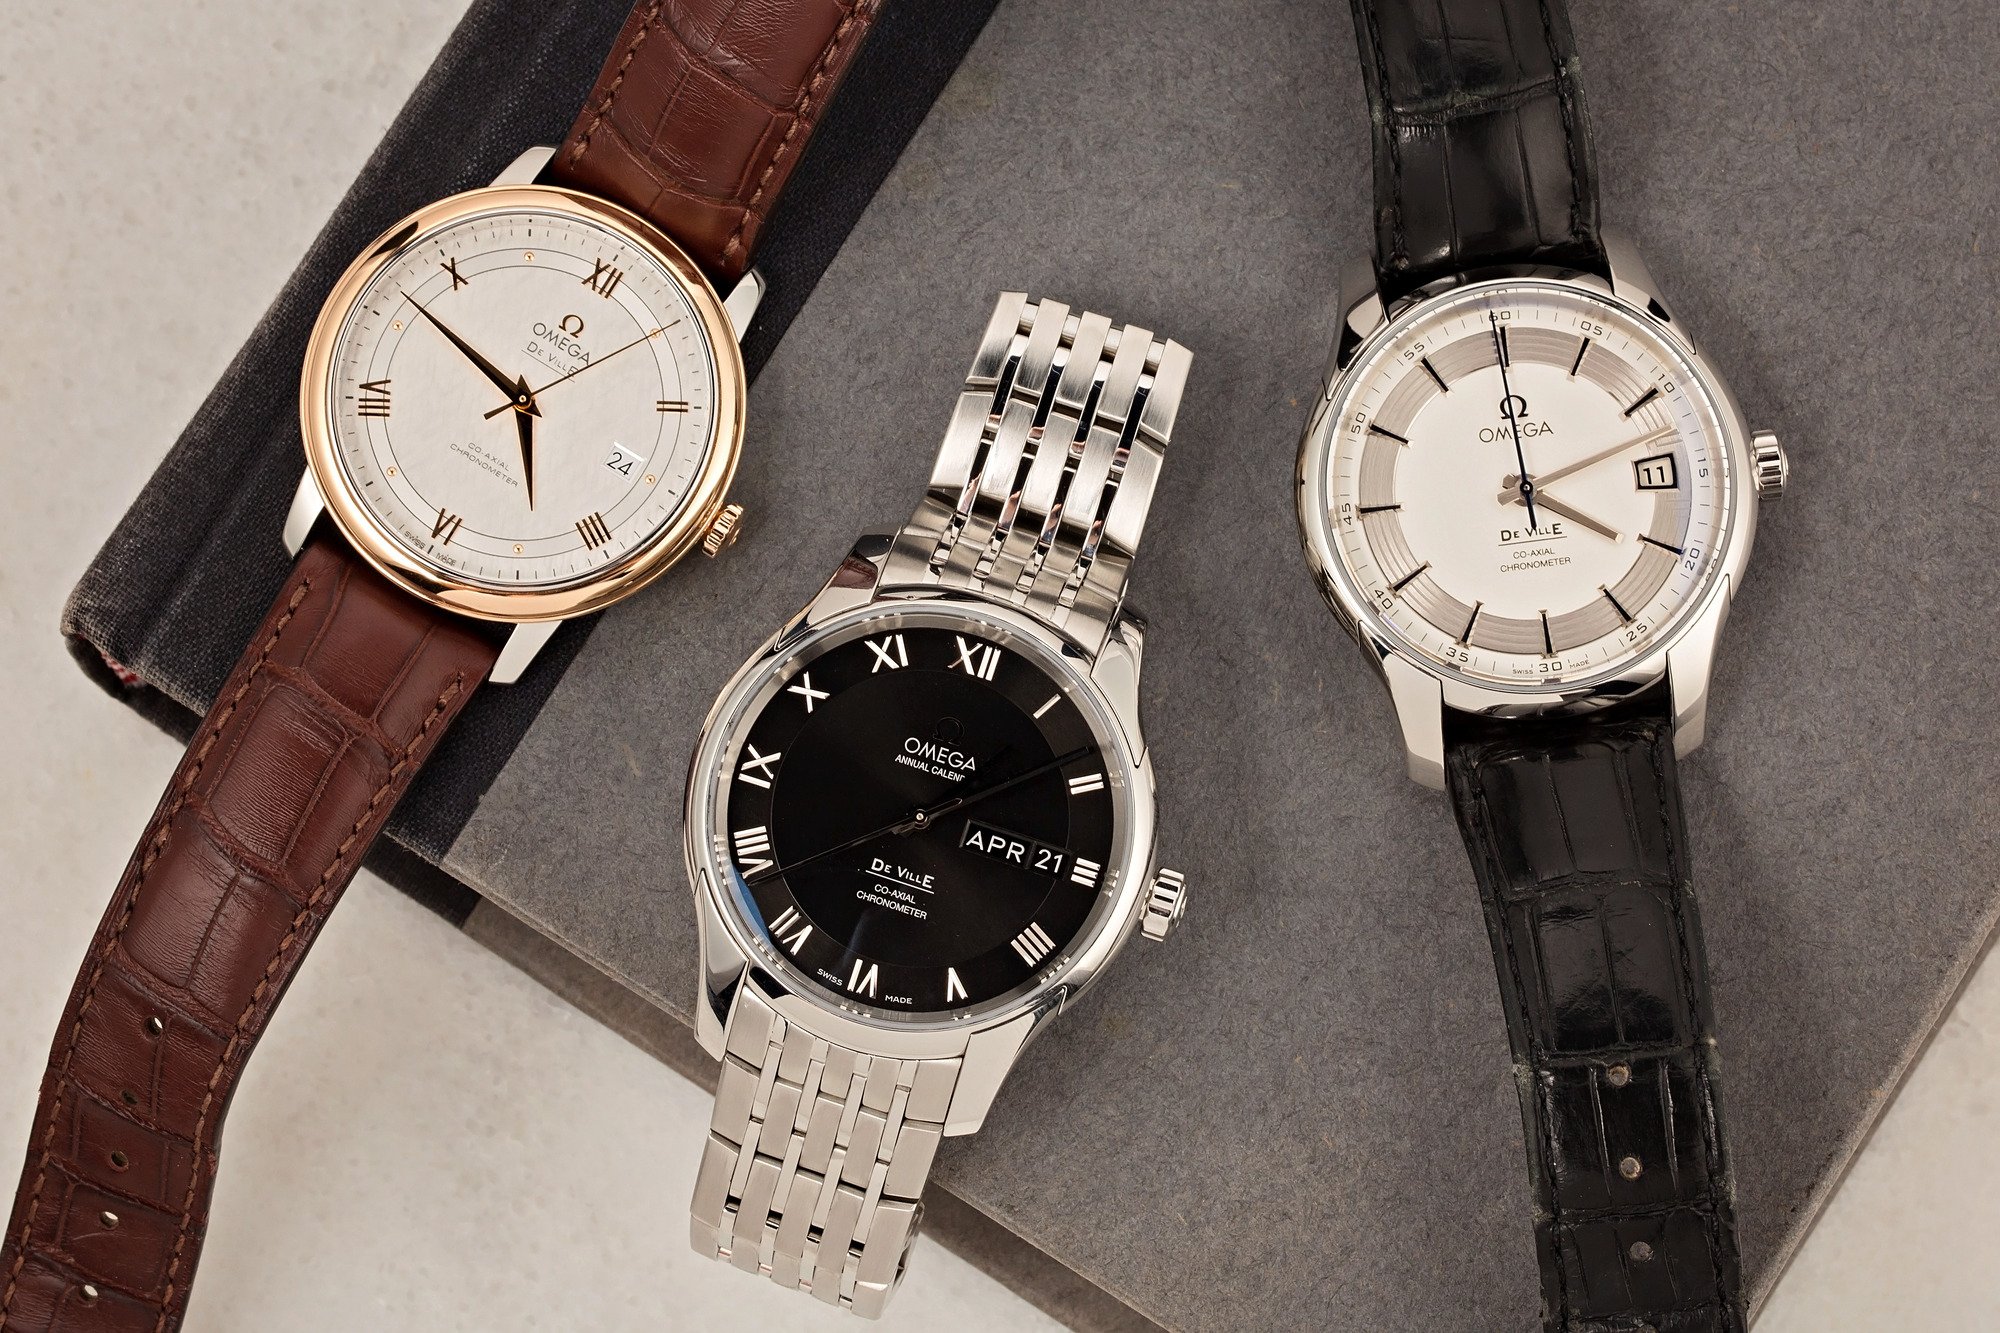 Omega Dress Watch Ultimate Buying Guide - Bob's Watches